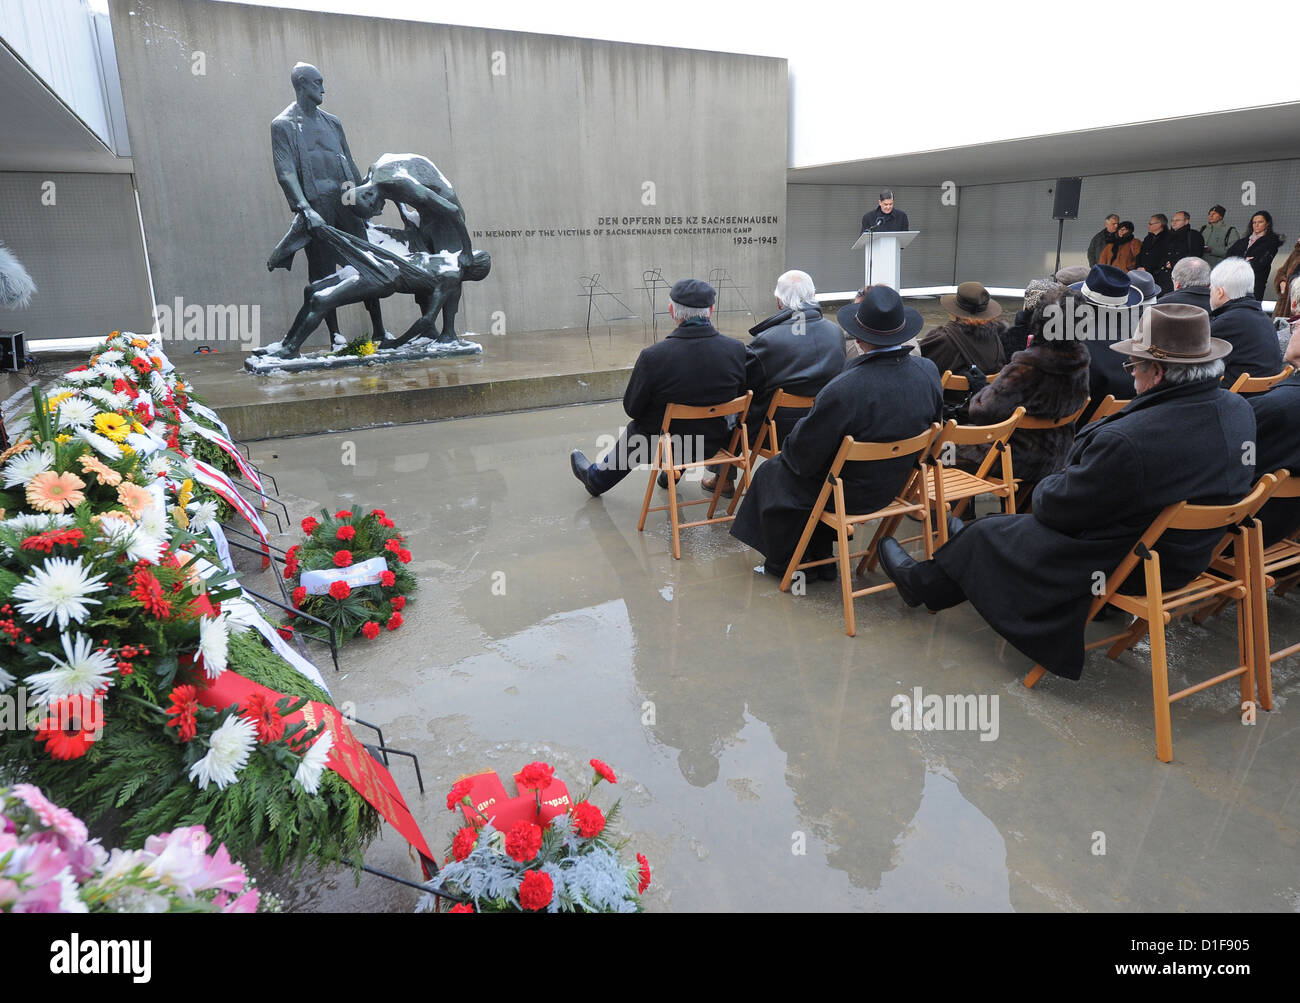 Wreaths and flowers are laid down at the Station Z in the former concentration camp Sachsenhausen in Oranienburg, Germany, 15 December 2012. The Central Council of German Sinti and Roma commemorated the deportation of 23000 Sinti and Roma in the Auschwitz concentration camp. Photo: Bernd Settnik Stock Photo